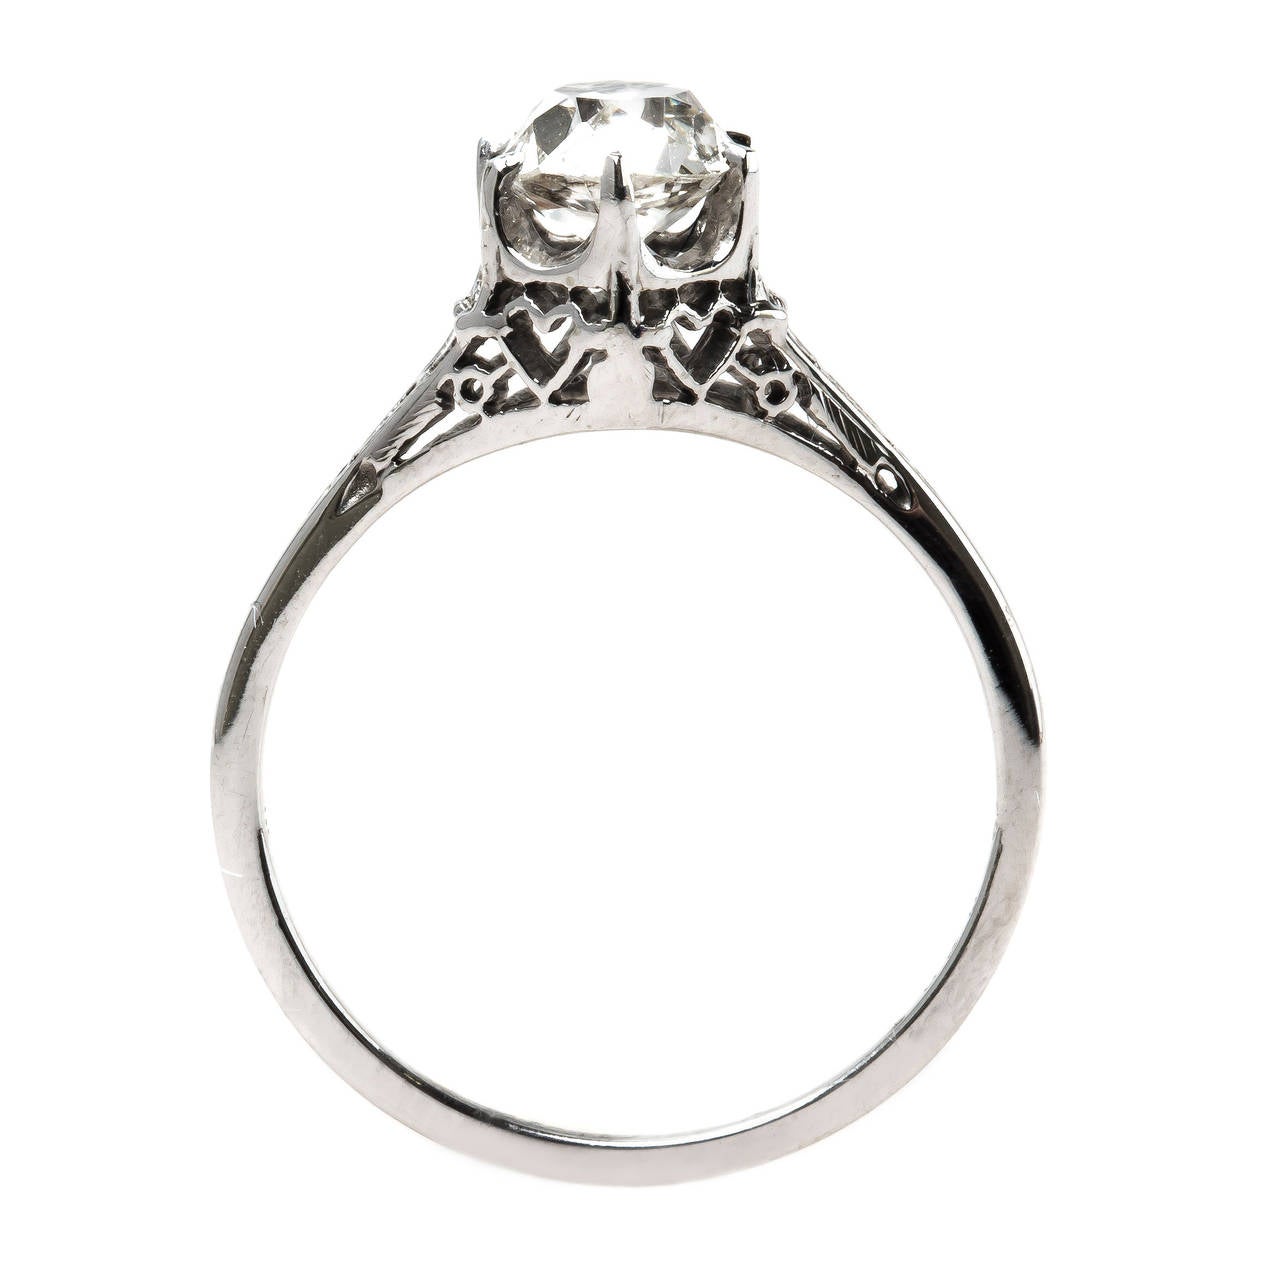 Romantic Edwardian Solitaire Engagement Ring with Heart-Shaped Metalwork 1